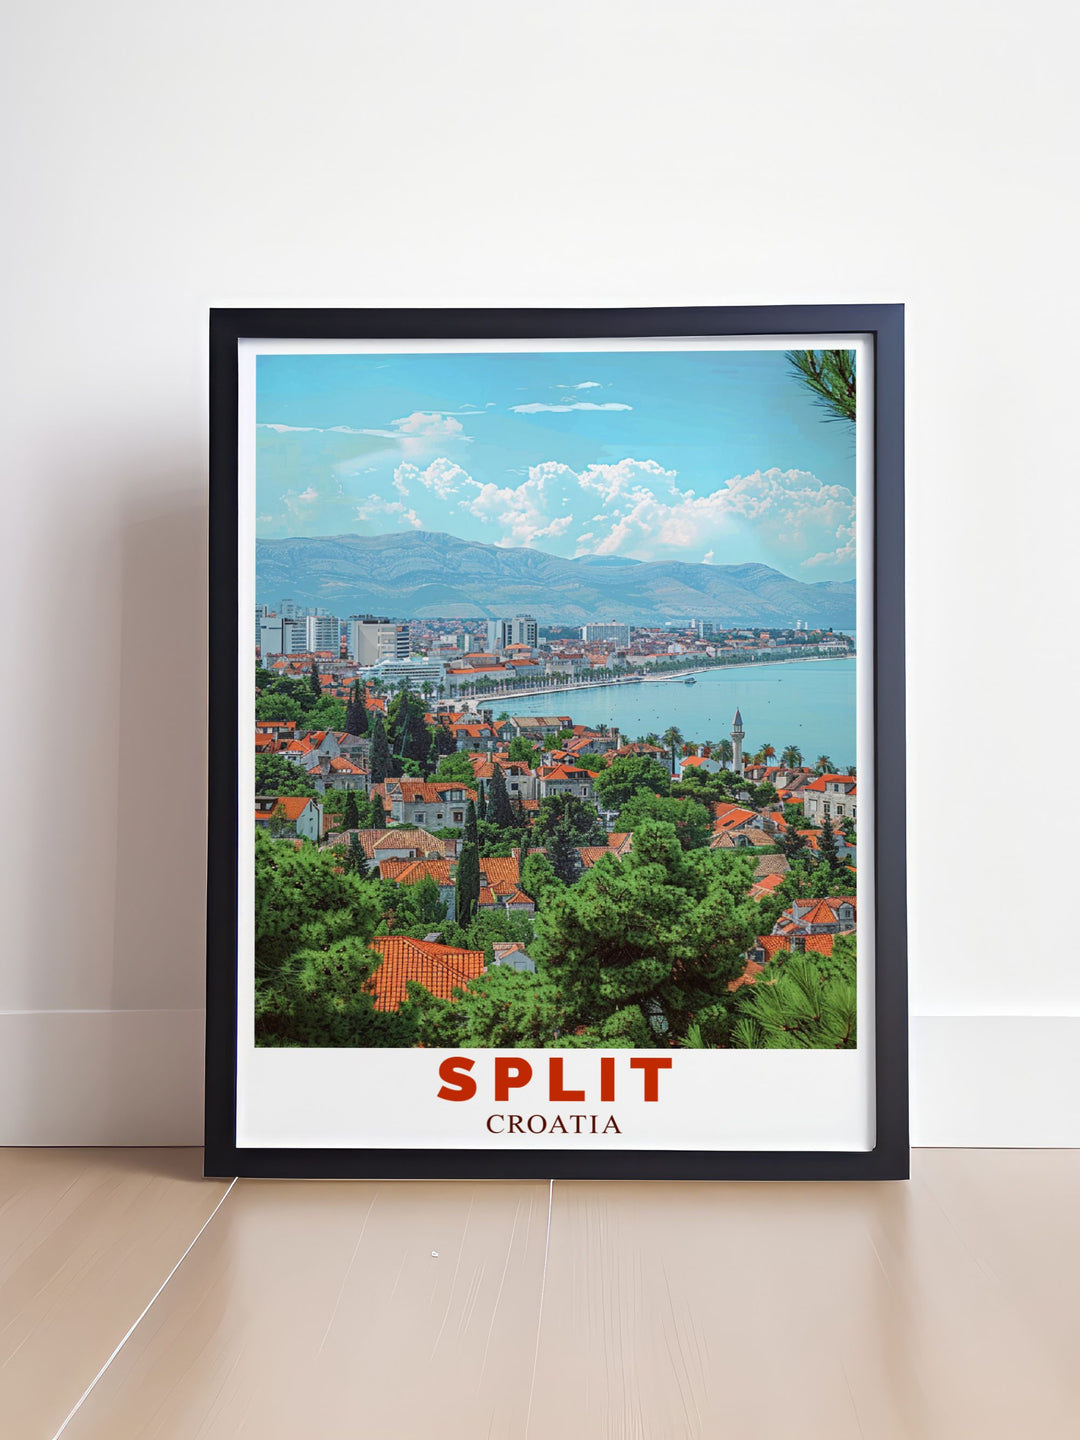 Marjan Hill in Split is beautifully illustrated in this poster, showcasing its serene natural beauty and panoramic vistas, perfect for art lovers and outdoor enthusiasts.